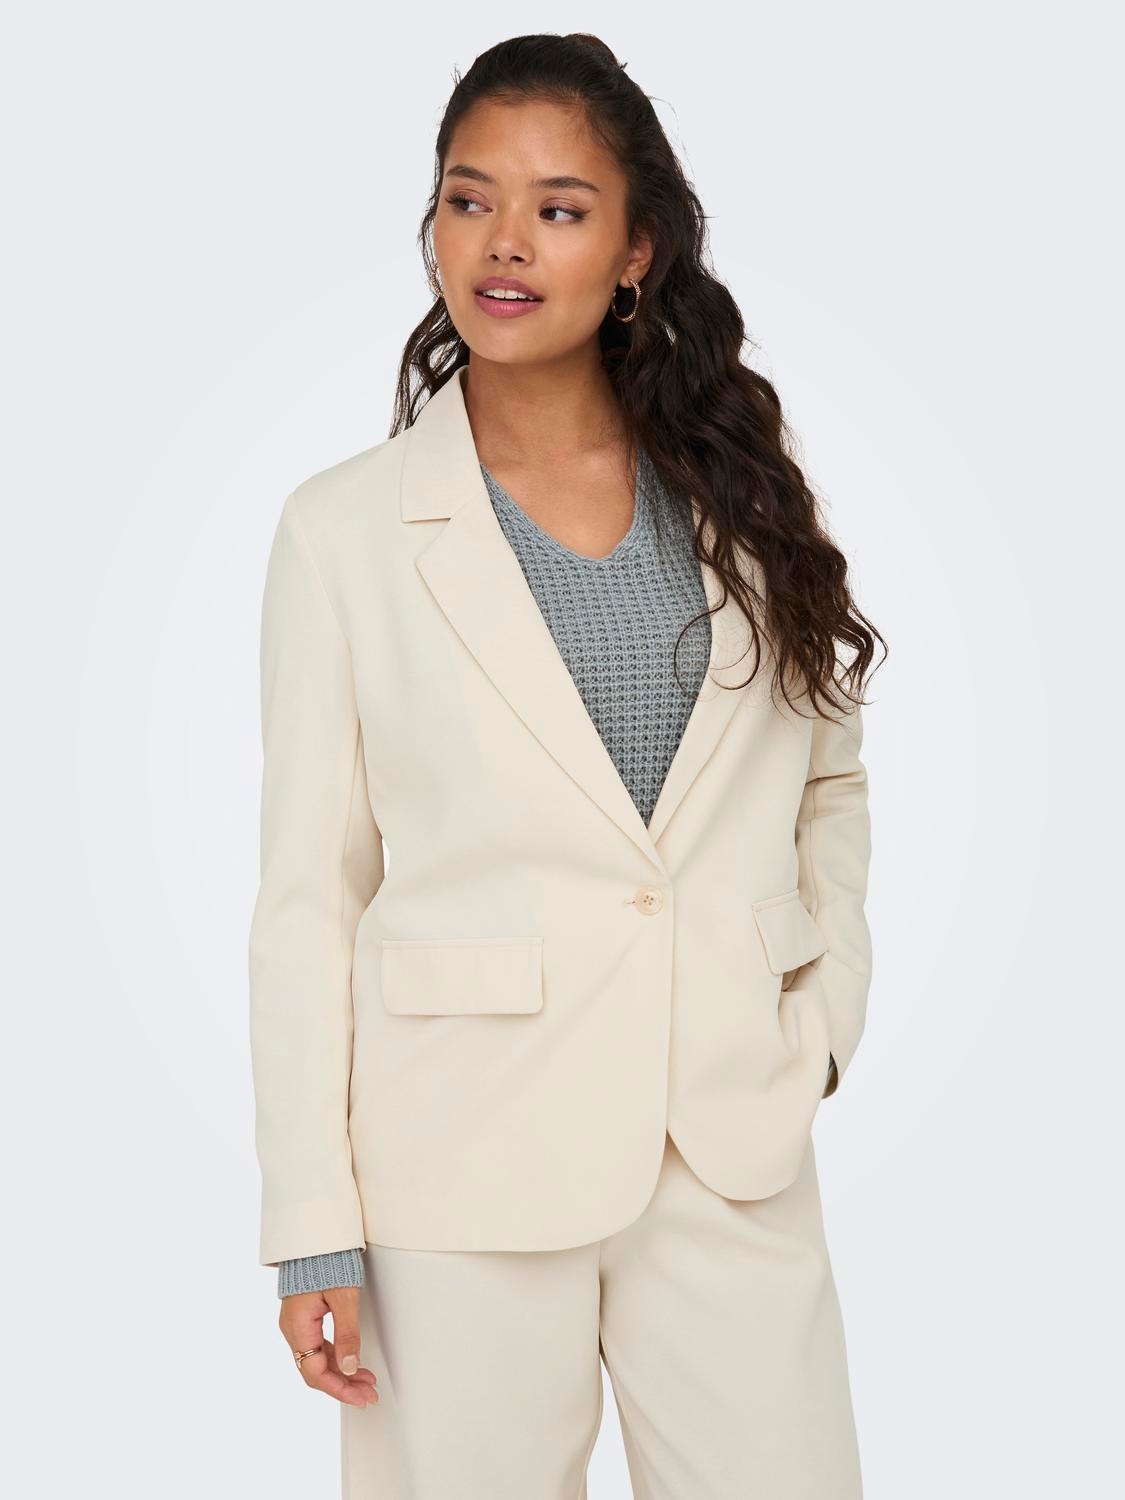 ONLY Blazers Regular Fit Col boutonné -Seedpearl - 15317698